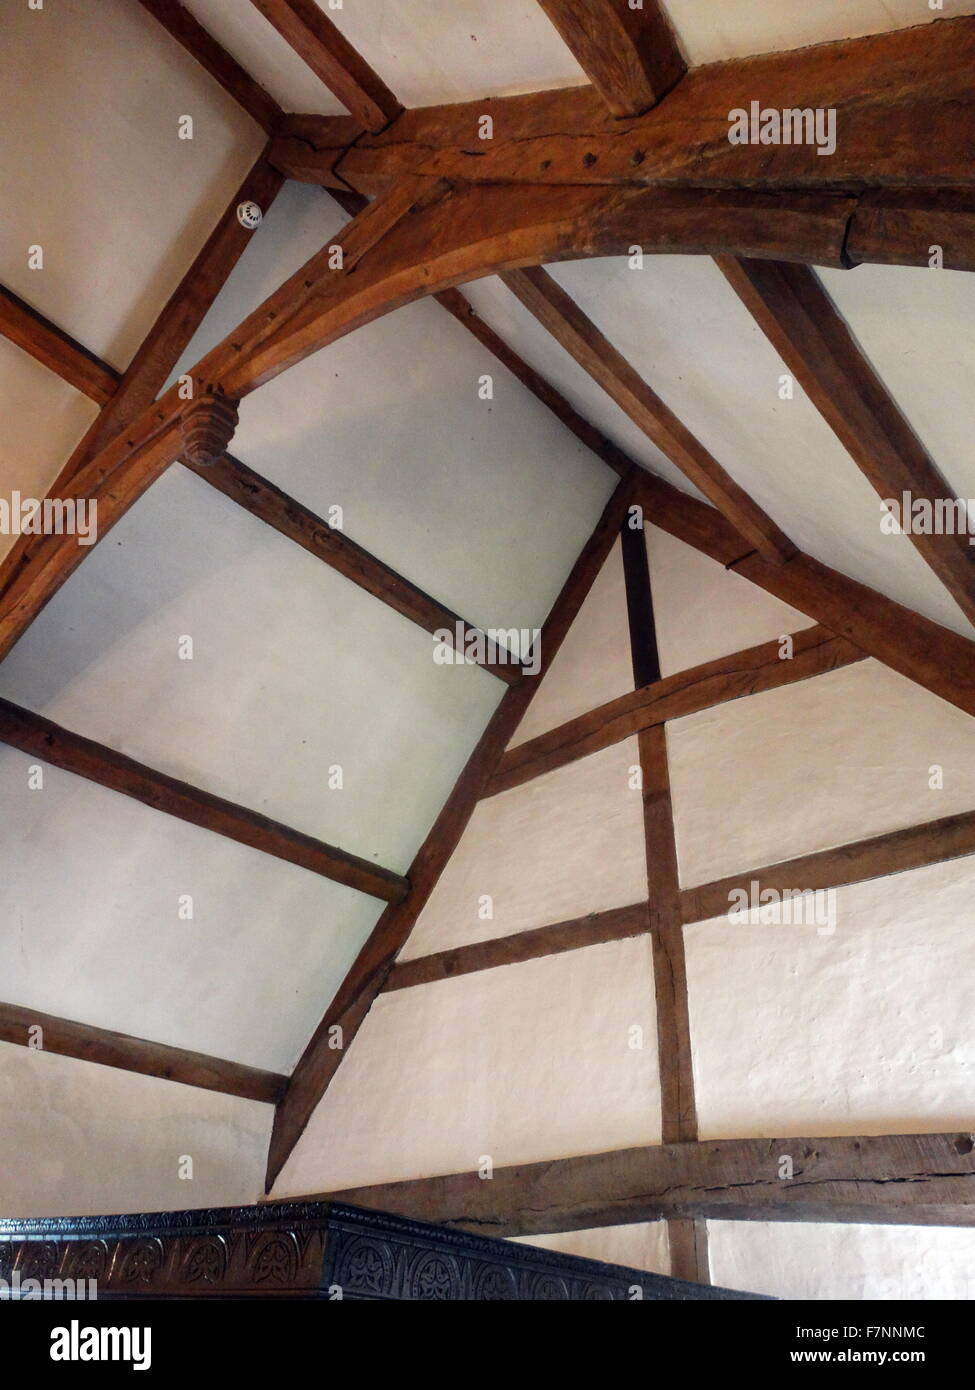 17th century Jacobean supported ceiling with wooden beams. Sulgrave House, ancestral home of George Washington's family, Northamptonshire, England Stock Photo